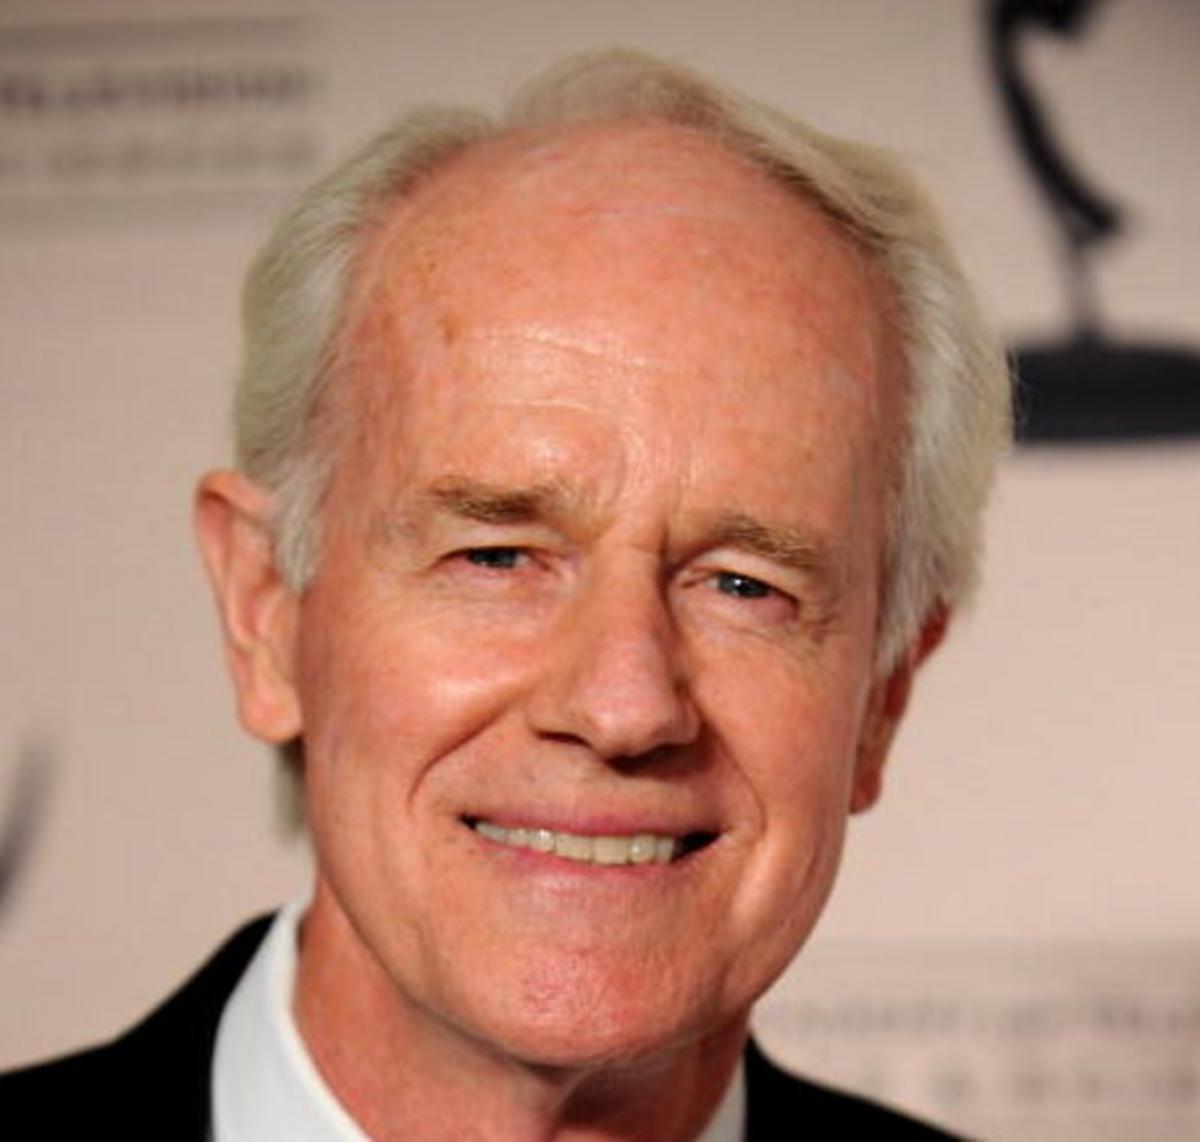 The 82-year old son of father Michael Joseph Farrell, Sr. and mother Agnes Sarah Farrell Mike Farrell in 2022 photo. Mike Farrell earned a  million dollar salary - leaving the net worth at  million in 2022